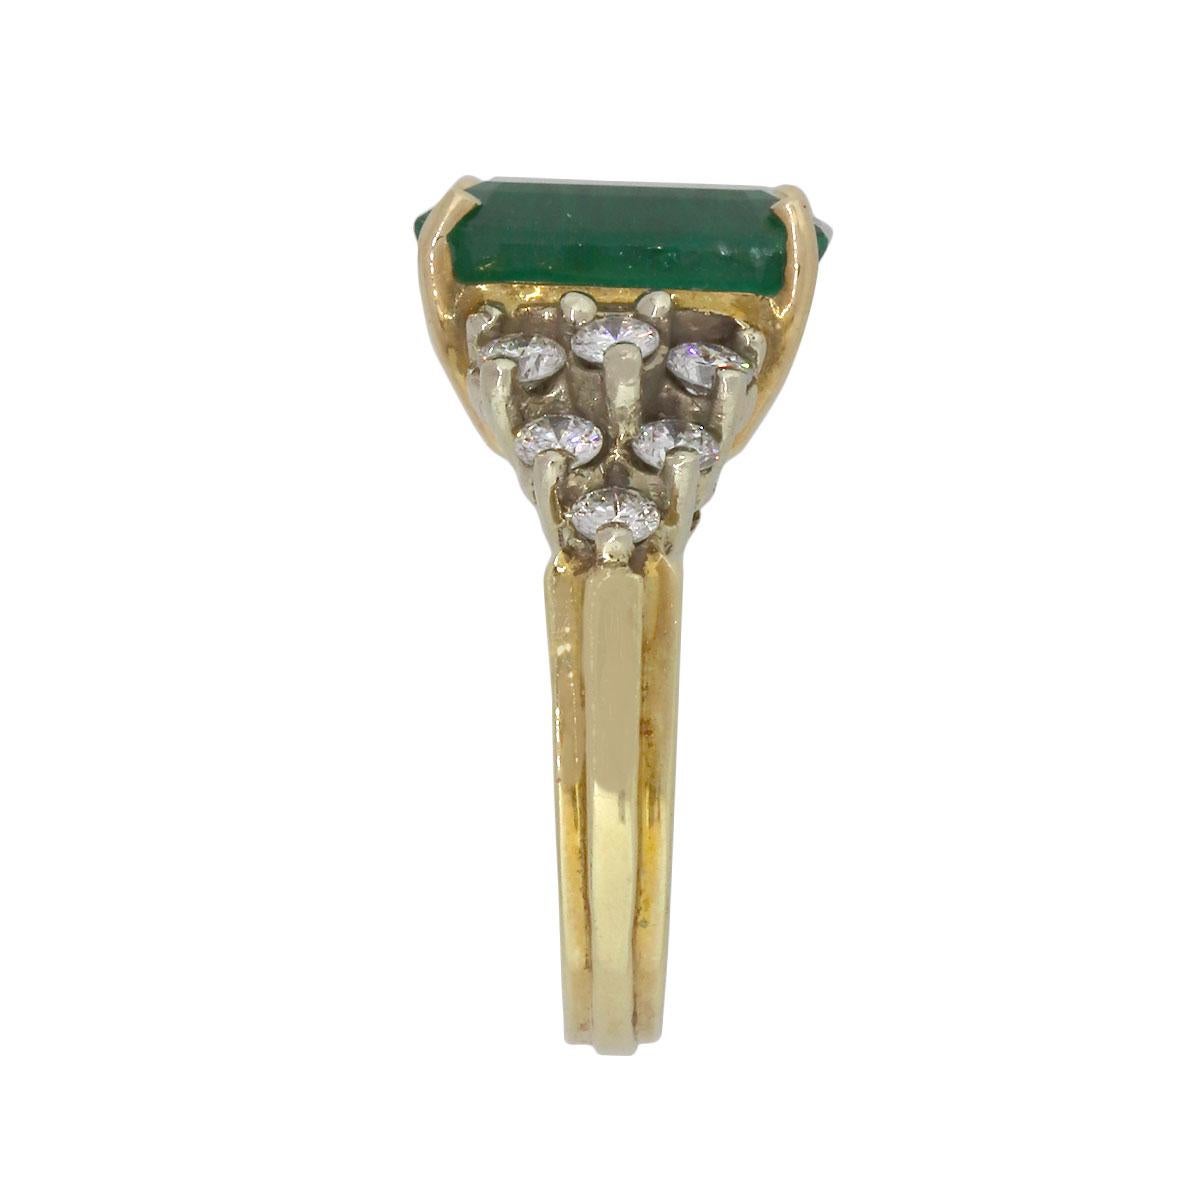 Material: 14k Yellow Gold
Gemstone Details: 5.64ct emerald stone measuring approx. 12.22mm x 9.70mm. AGL: CS1077285
Diamond Details: Approx. 0.50ctw of round cut diamonds. Diamonds are G/H in color and VS in clarity
Ring Size: 6
Measurements: 0.84